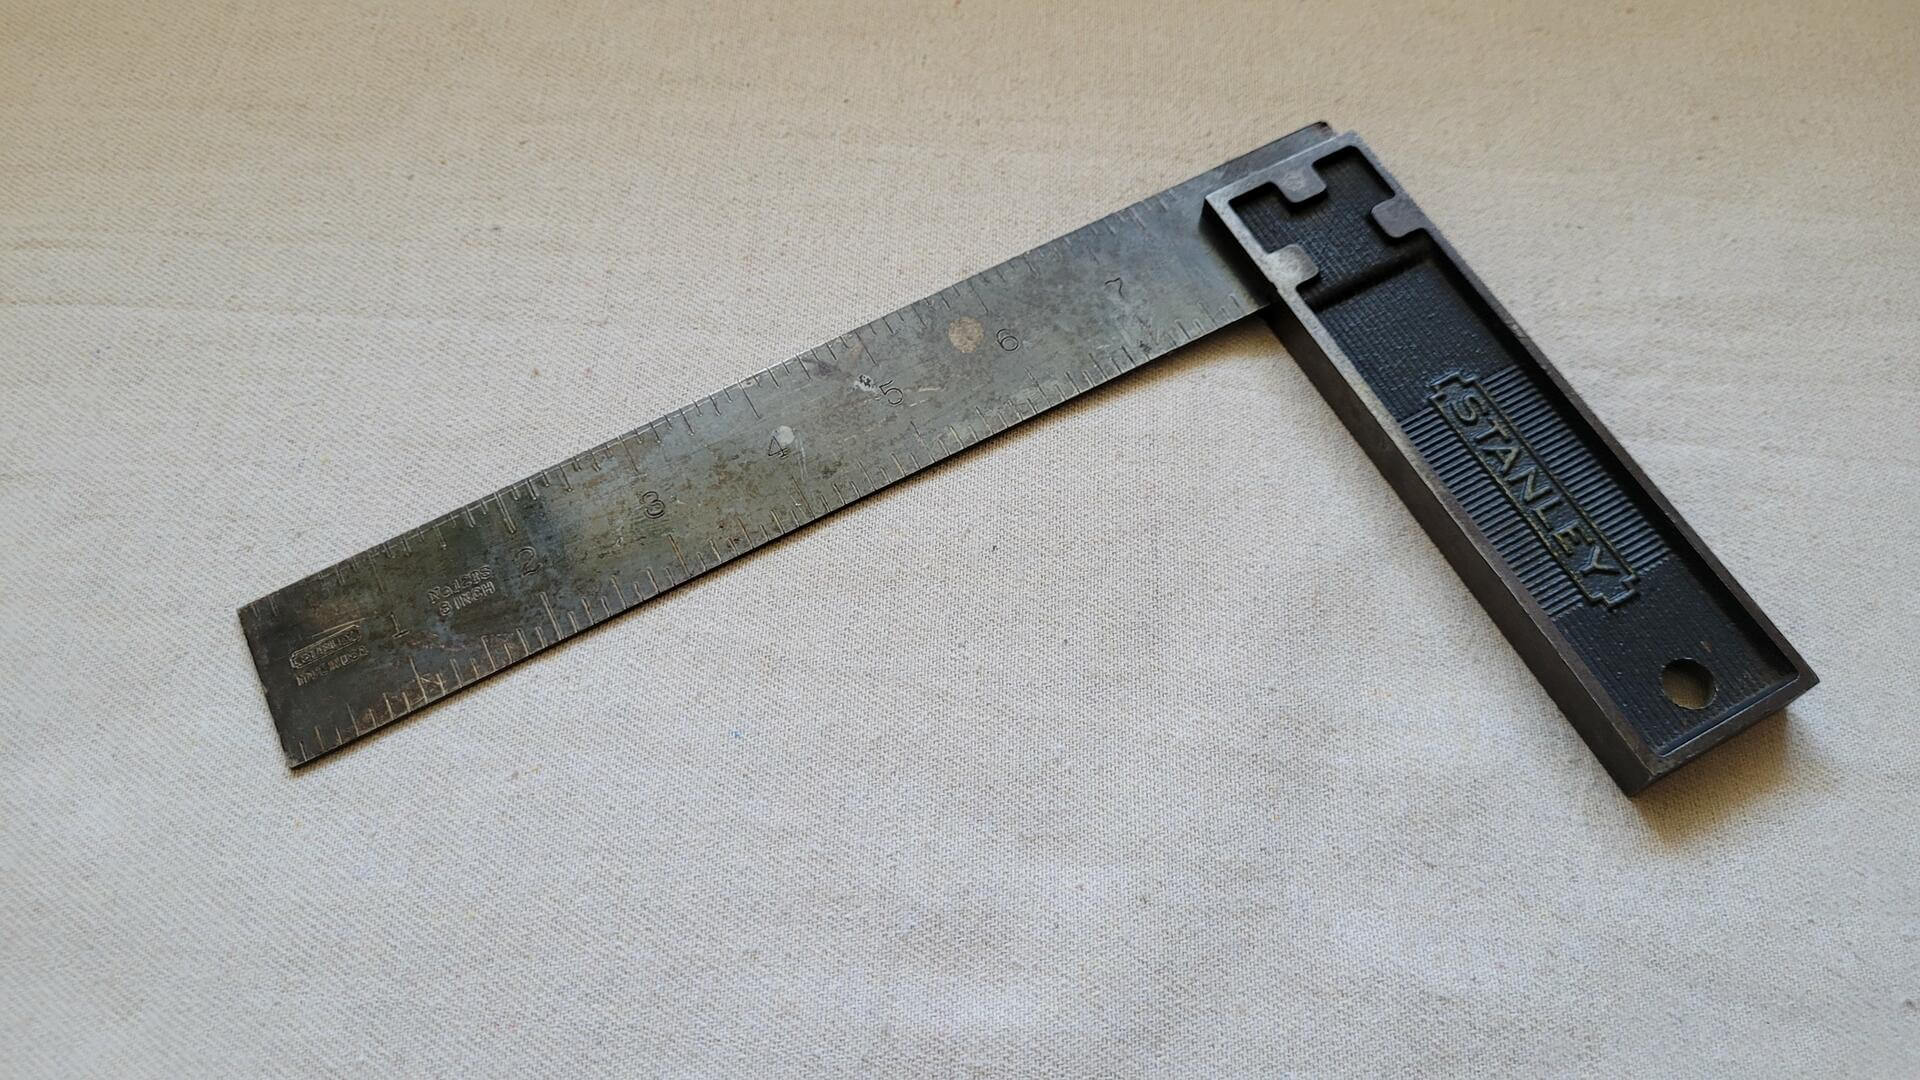 Vintage all steel No. 12TS Stanley eight inch try square. Antique made in USA marking and measuring hand tools